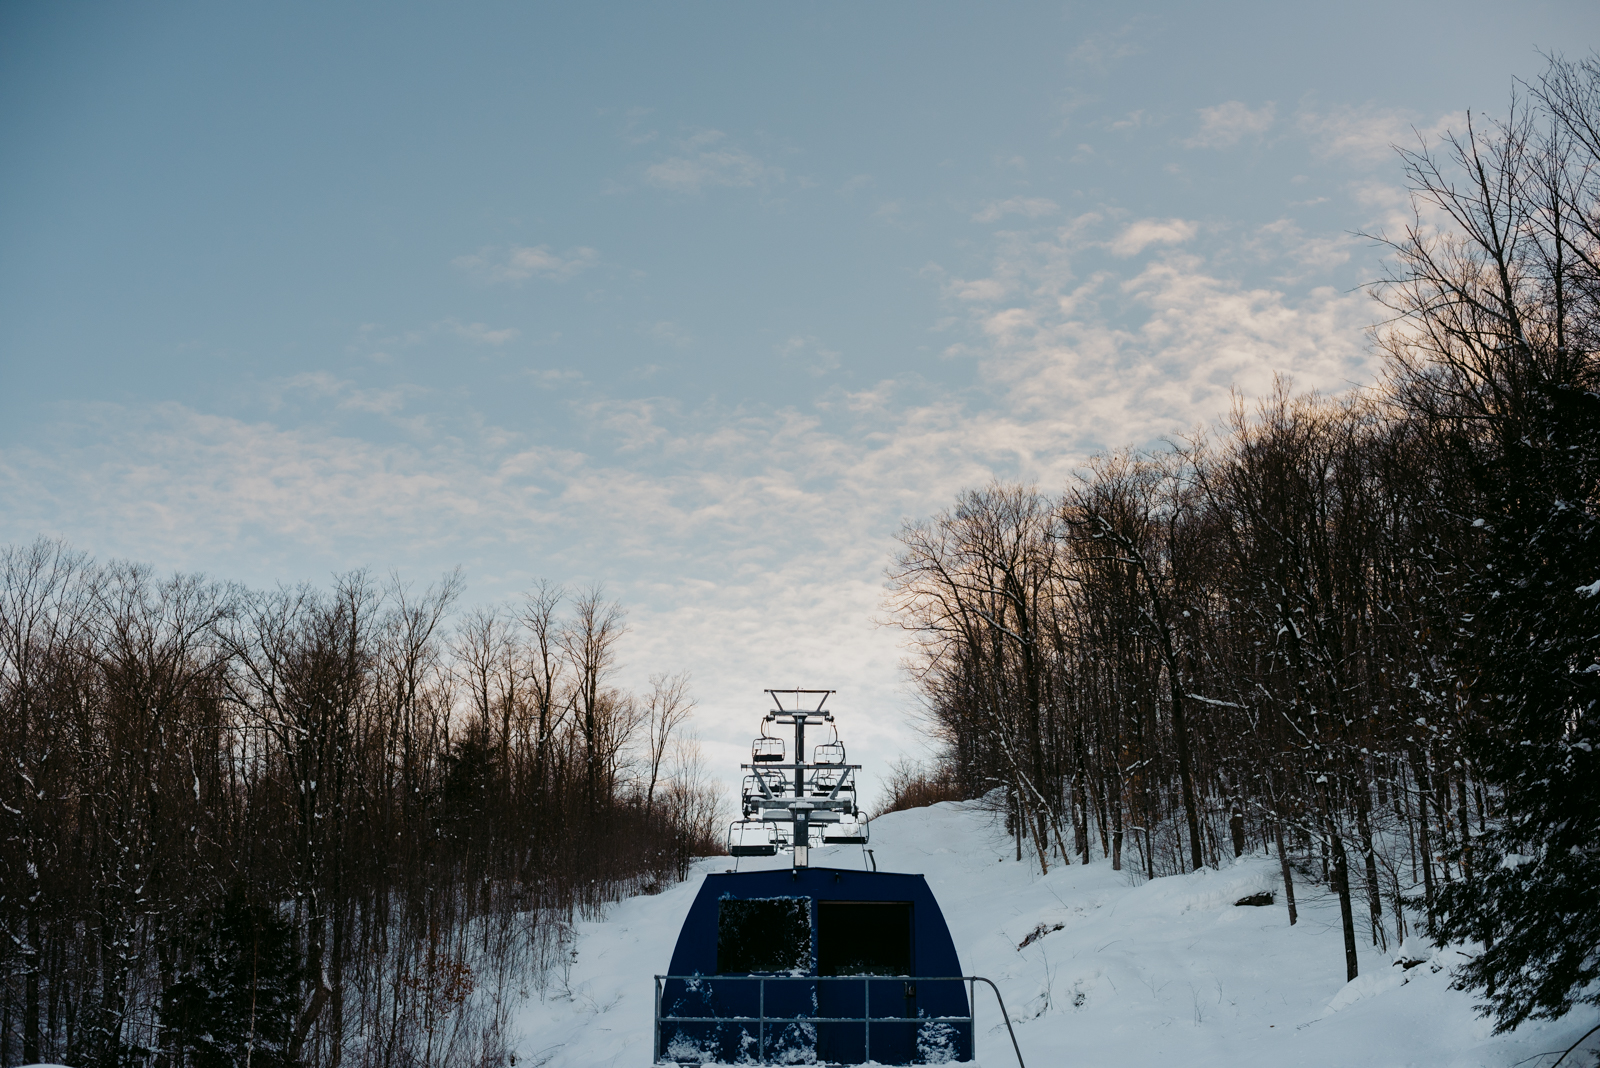 Camp Fortune Meech Lake chairlift at sunset